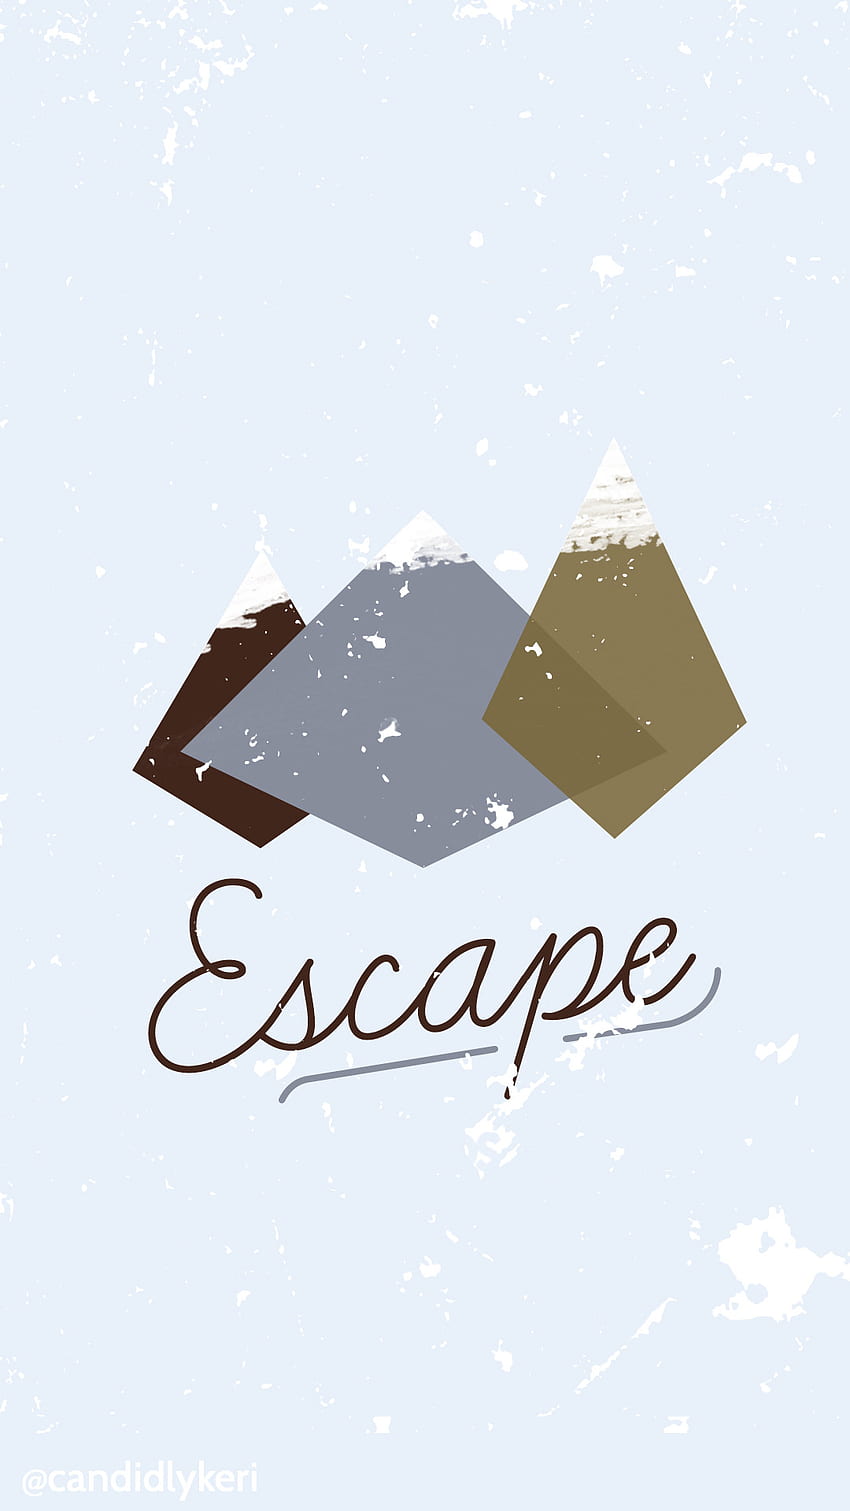 Escape cute mountain winter/fall scene you can for on the blog HD phone wallpaper